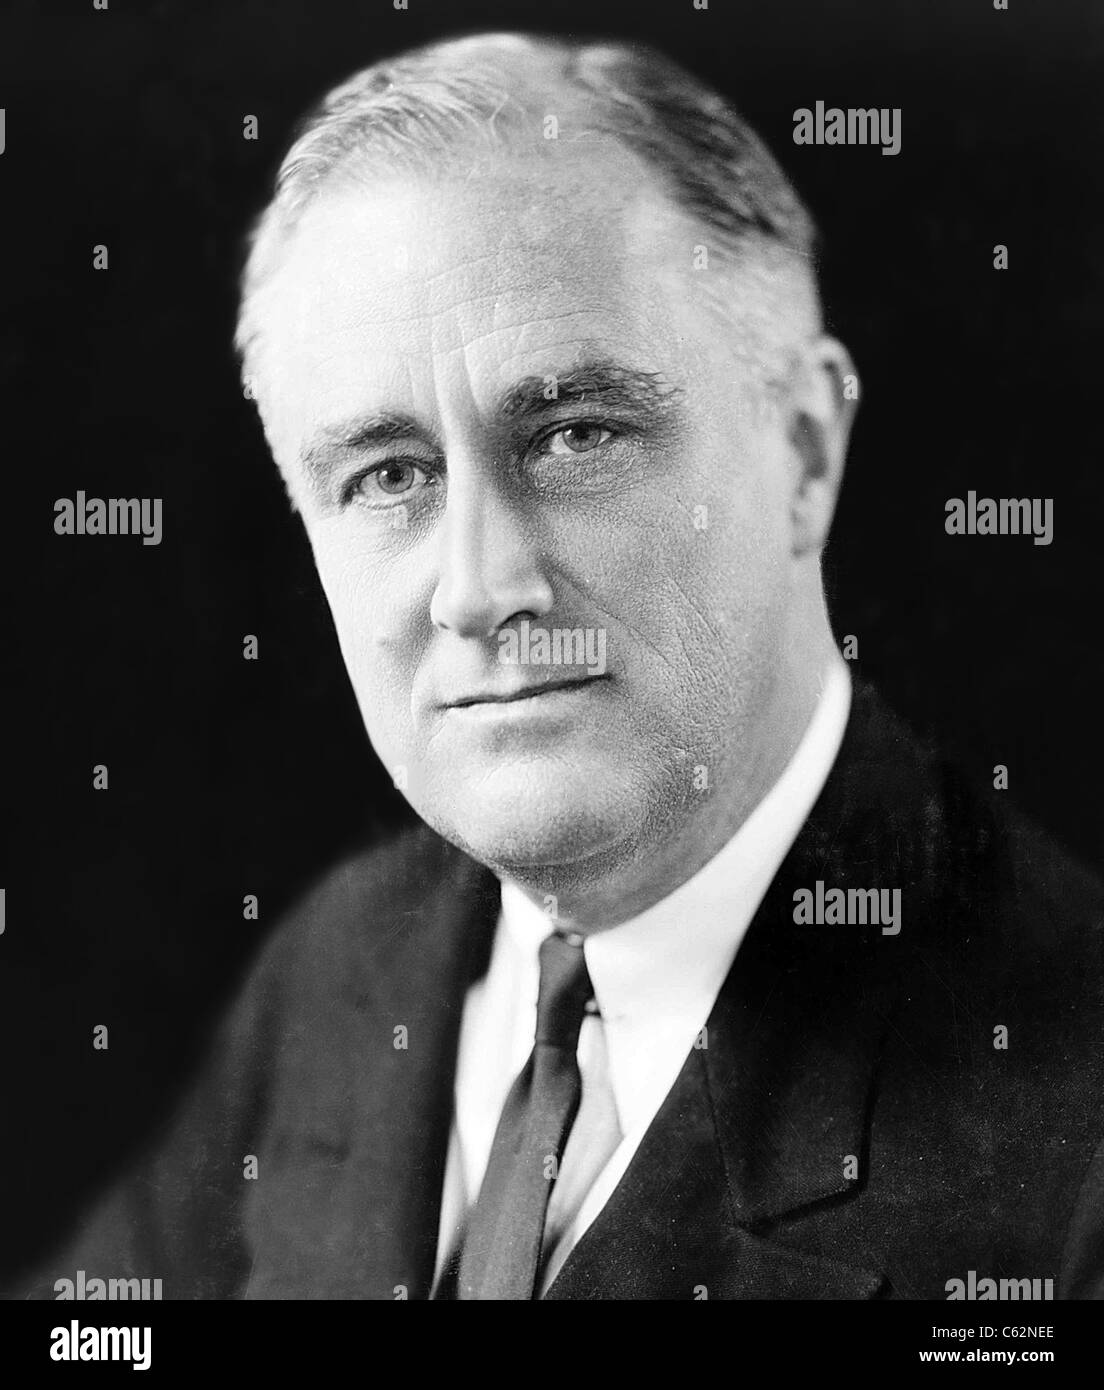 FRANKLIN DELANO ROOSEVELT (1882-1945) as 32nd President of the United States in 1933 Stock Photo